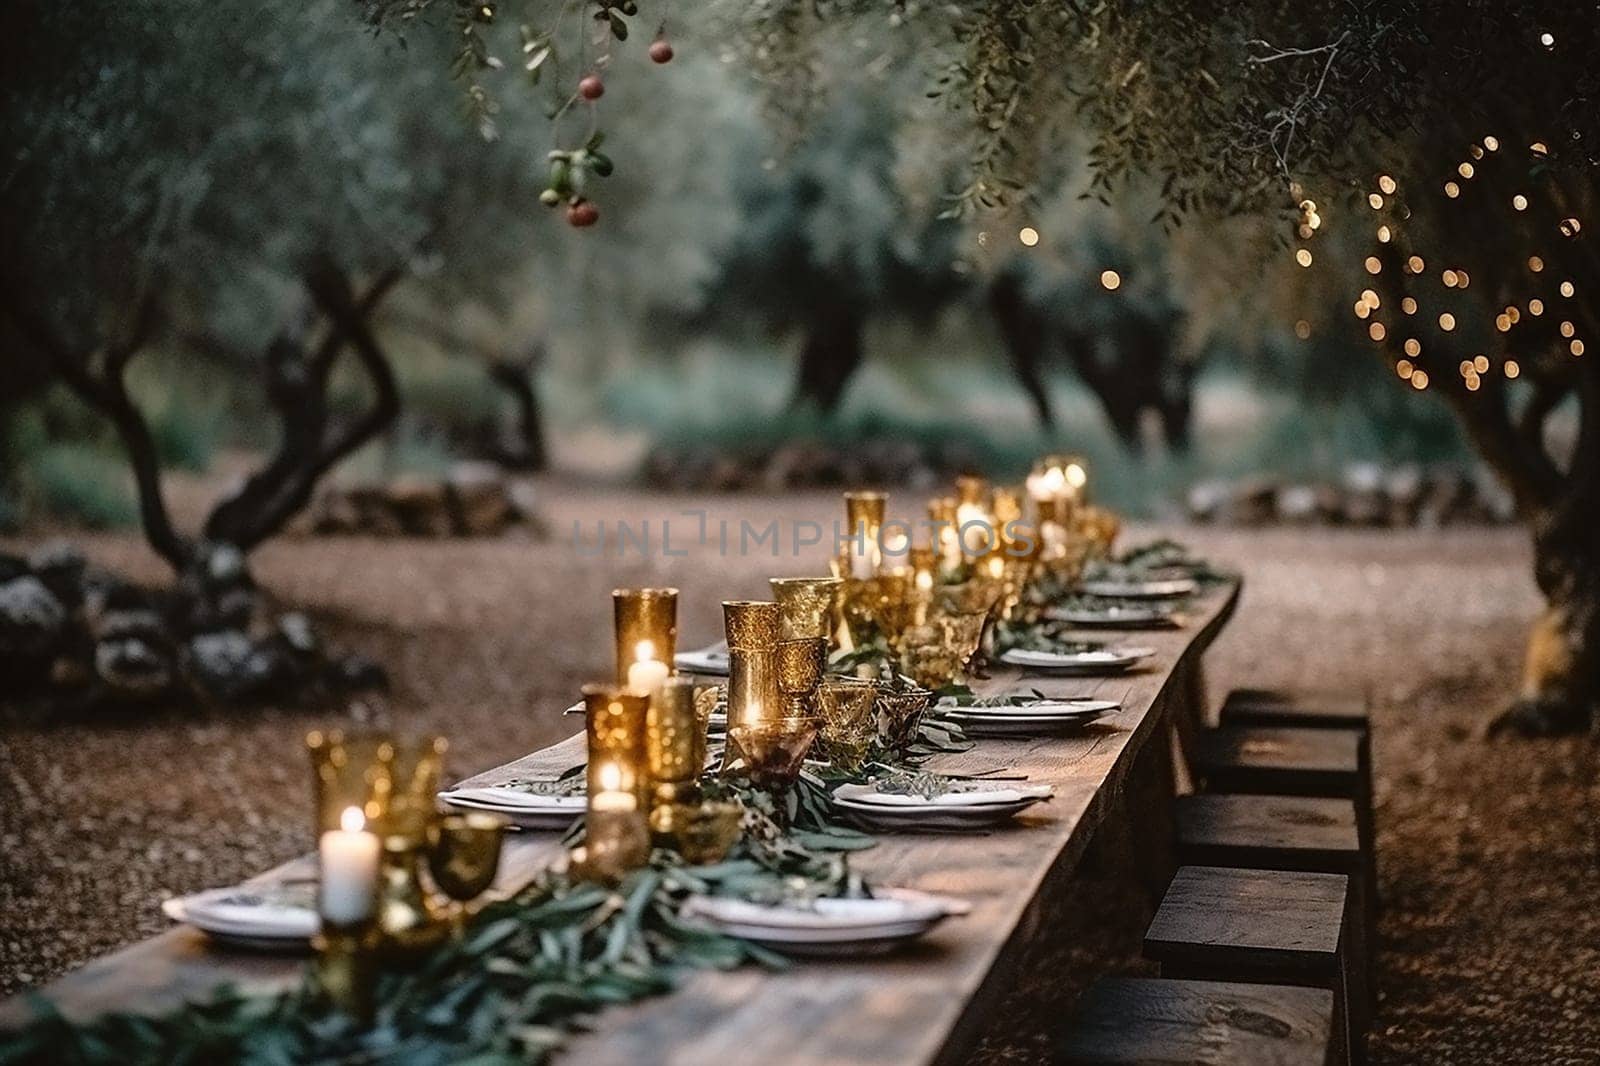 Elegant outdoor dining setup with a long table, candles, and string lights among olive trees.